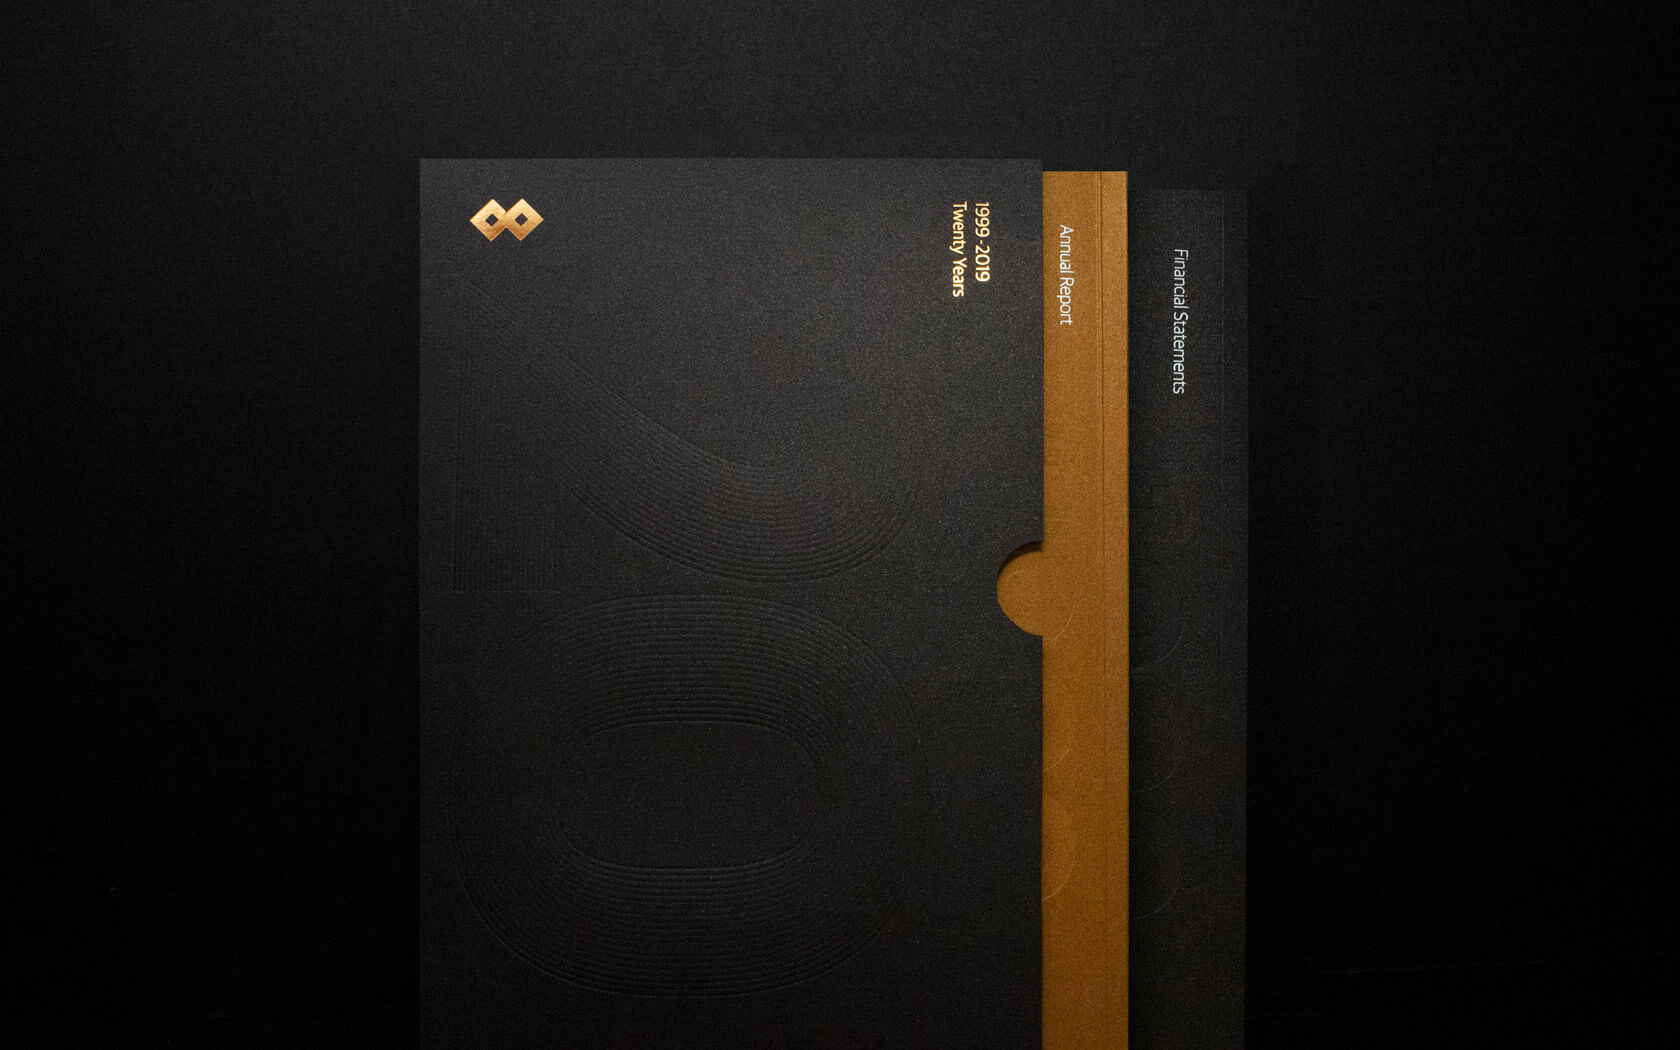 GFH Annual Report 2019. Report with slipcase